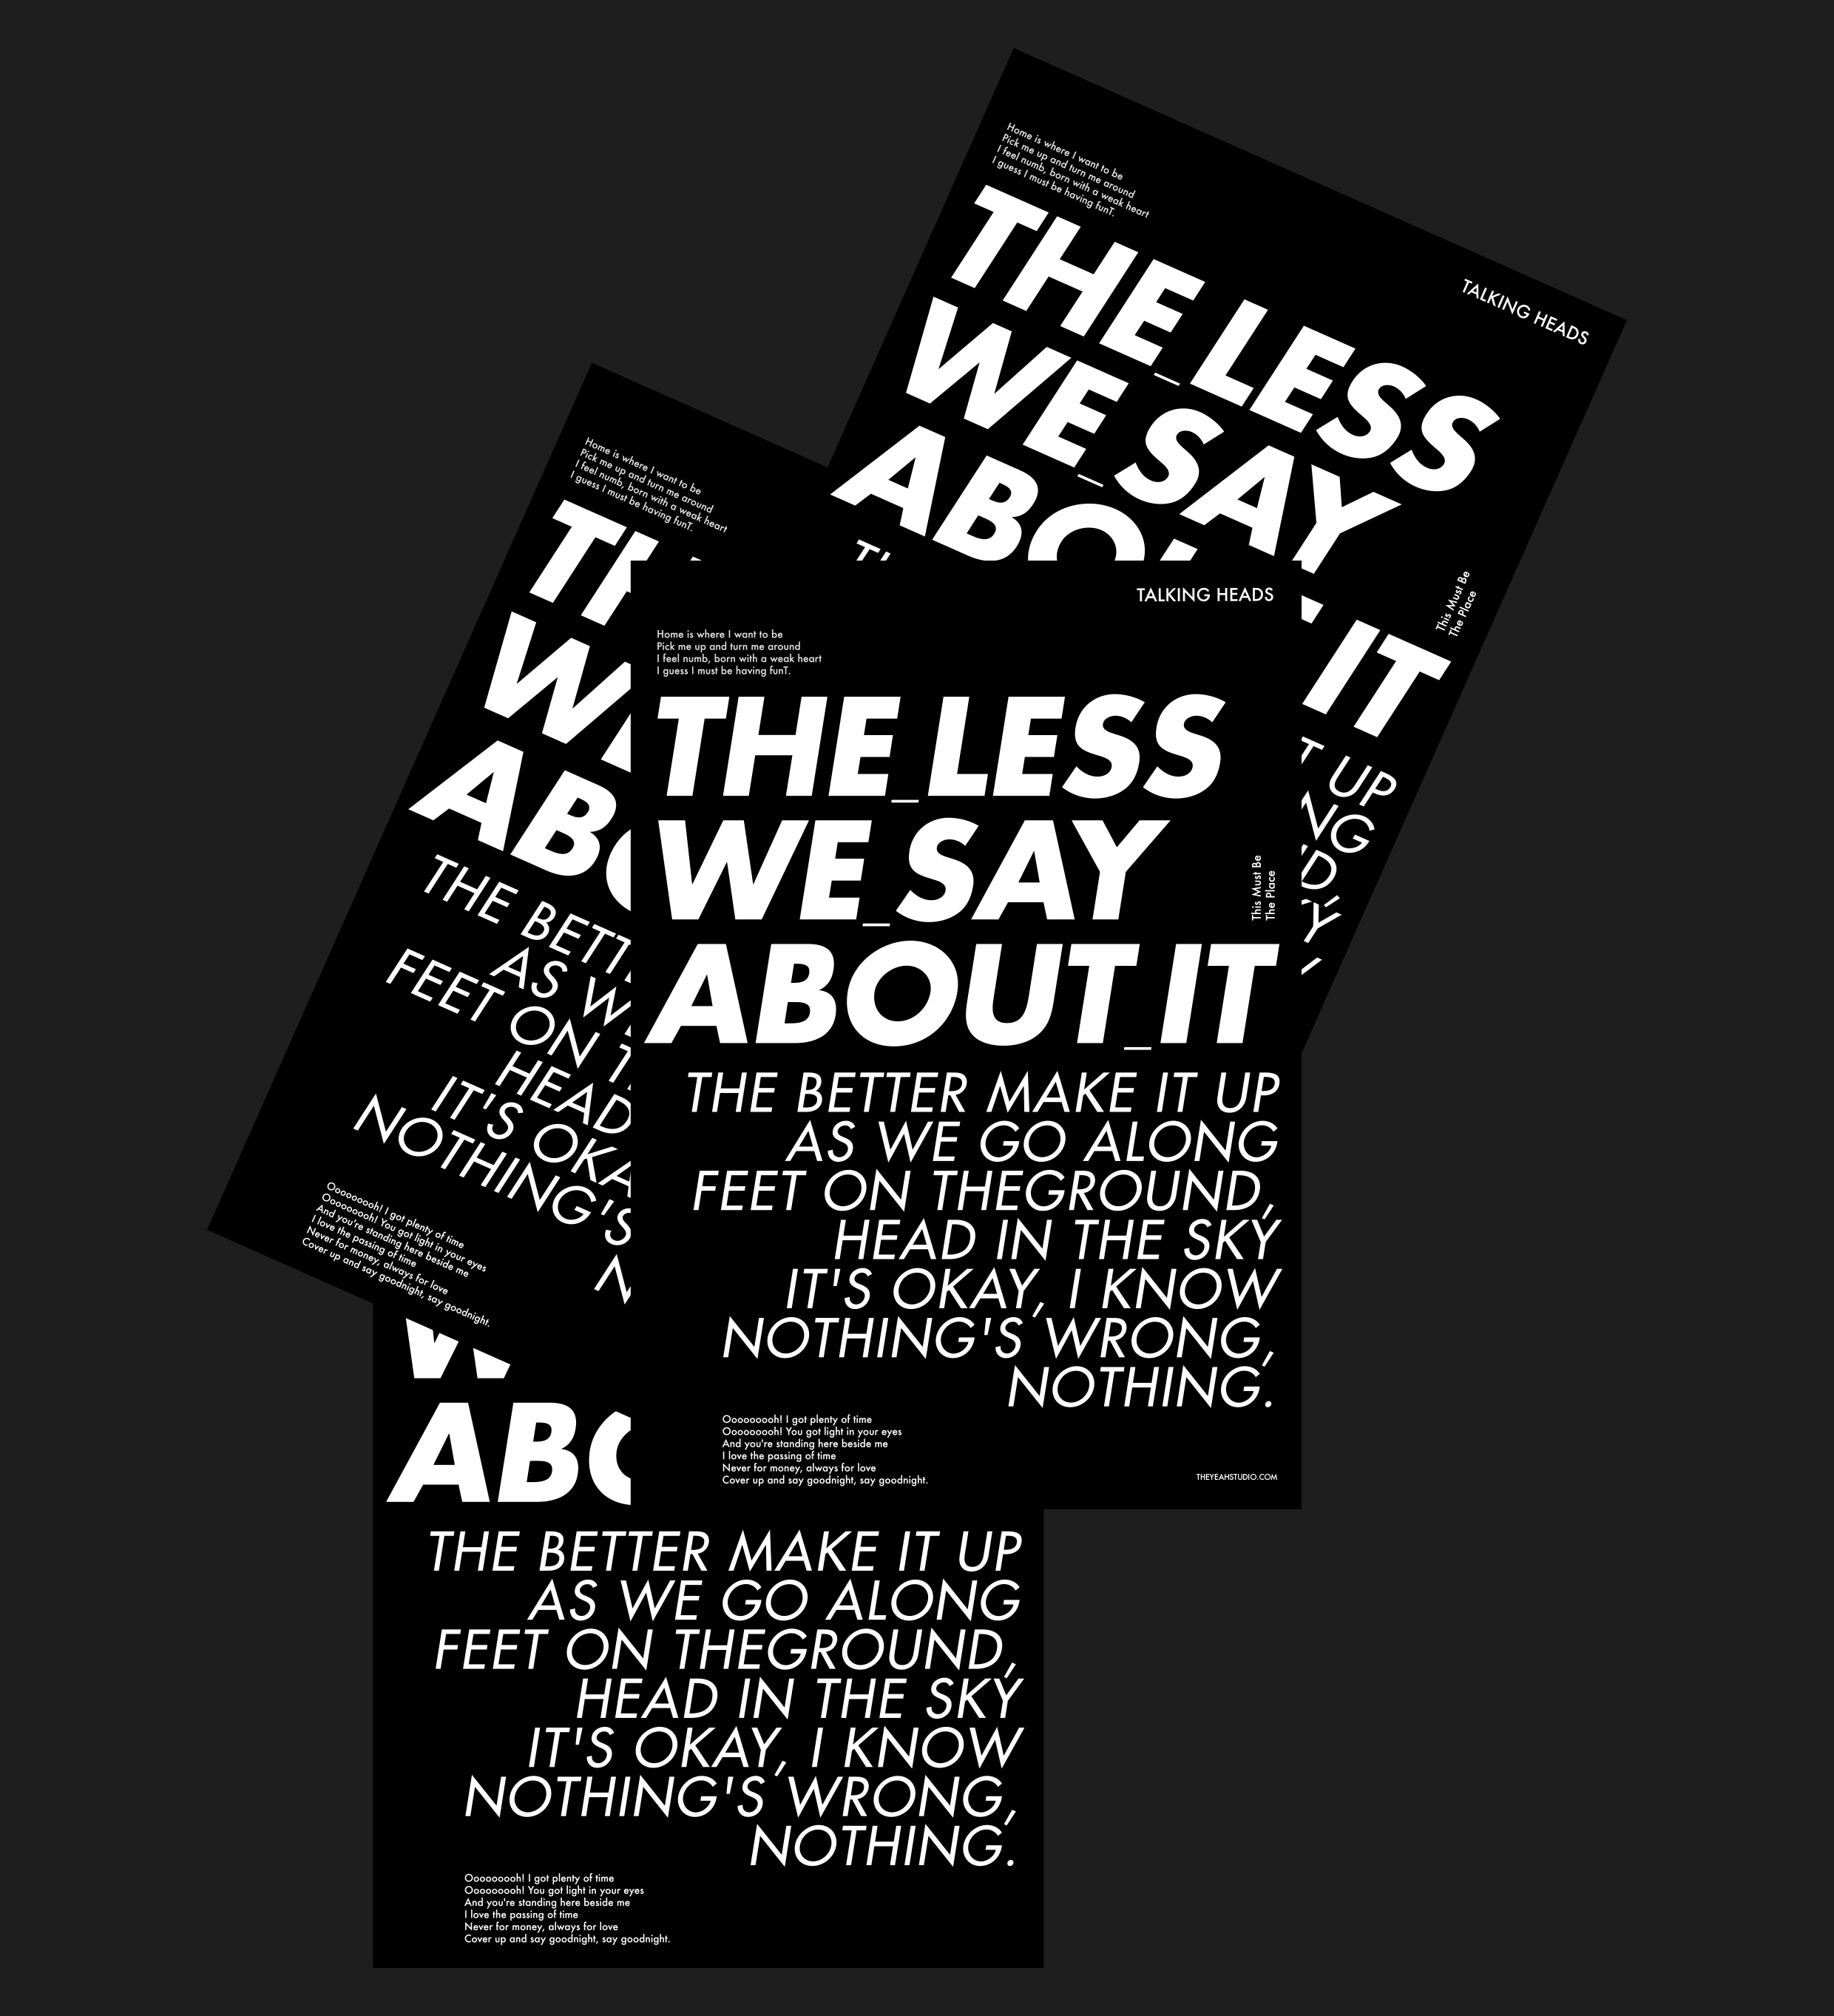 THE LESS_TH_2